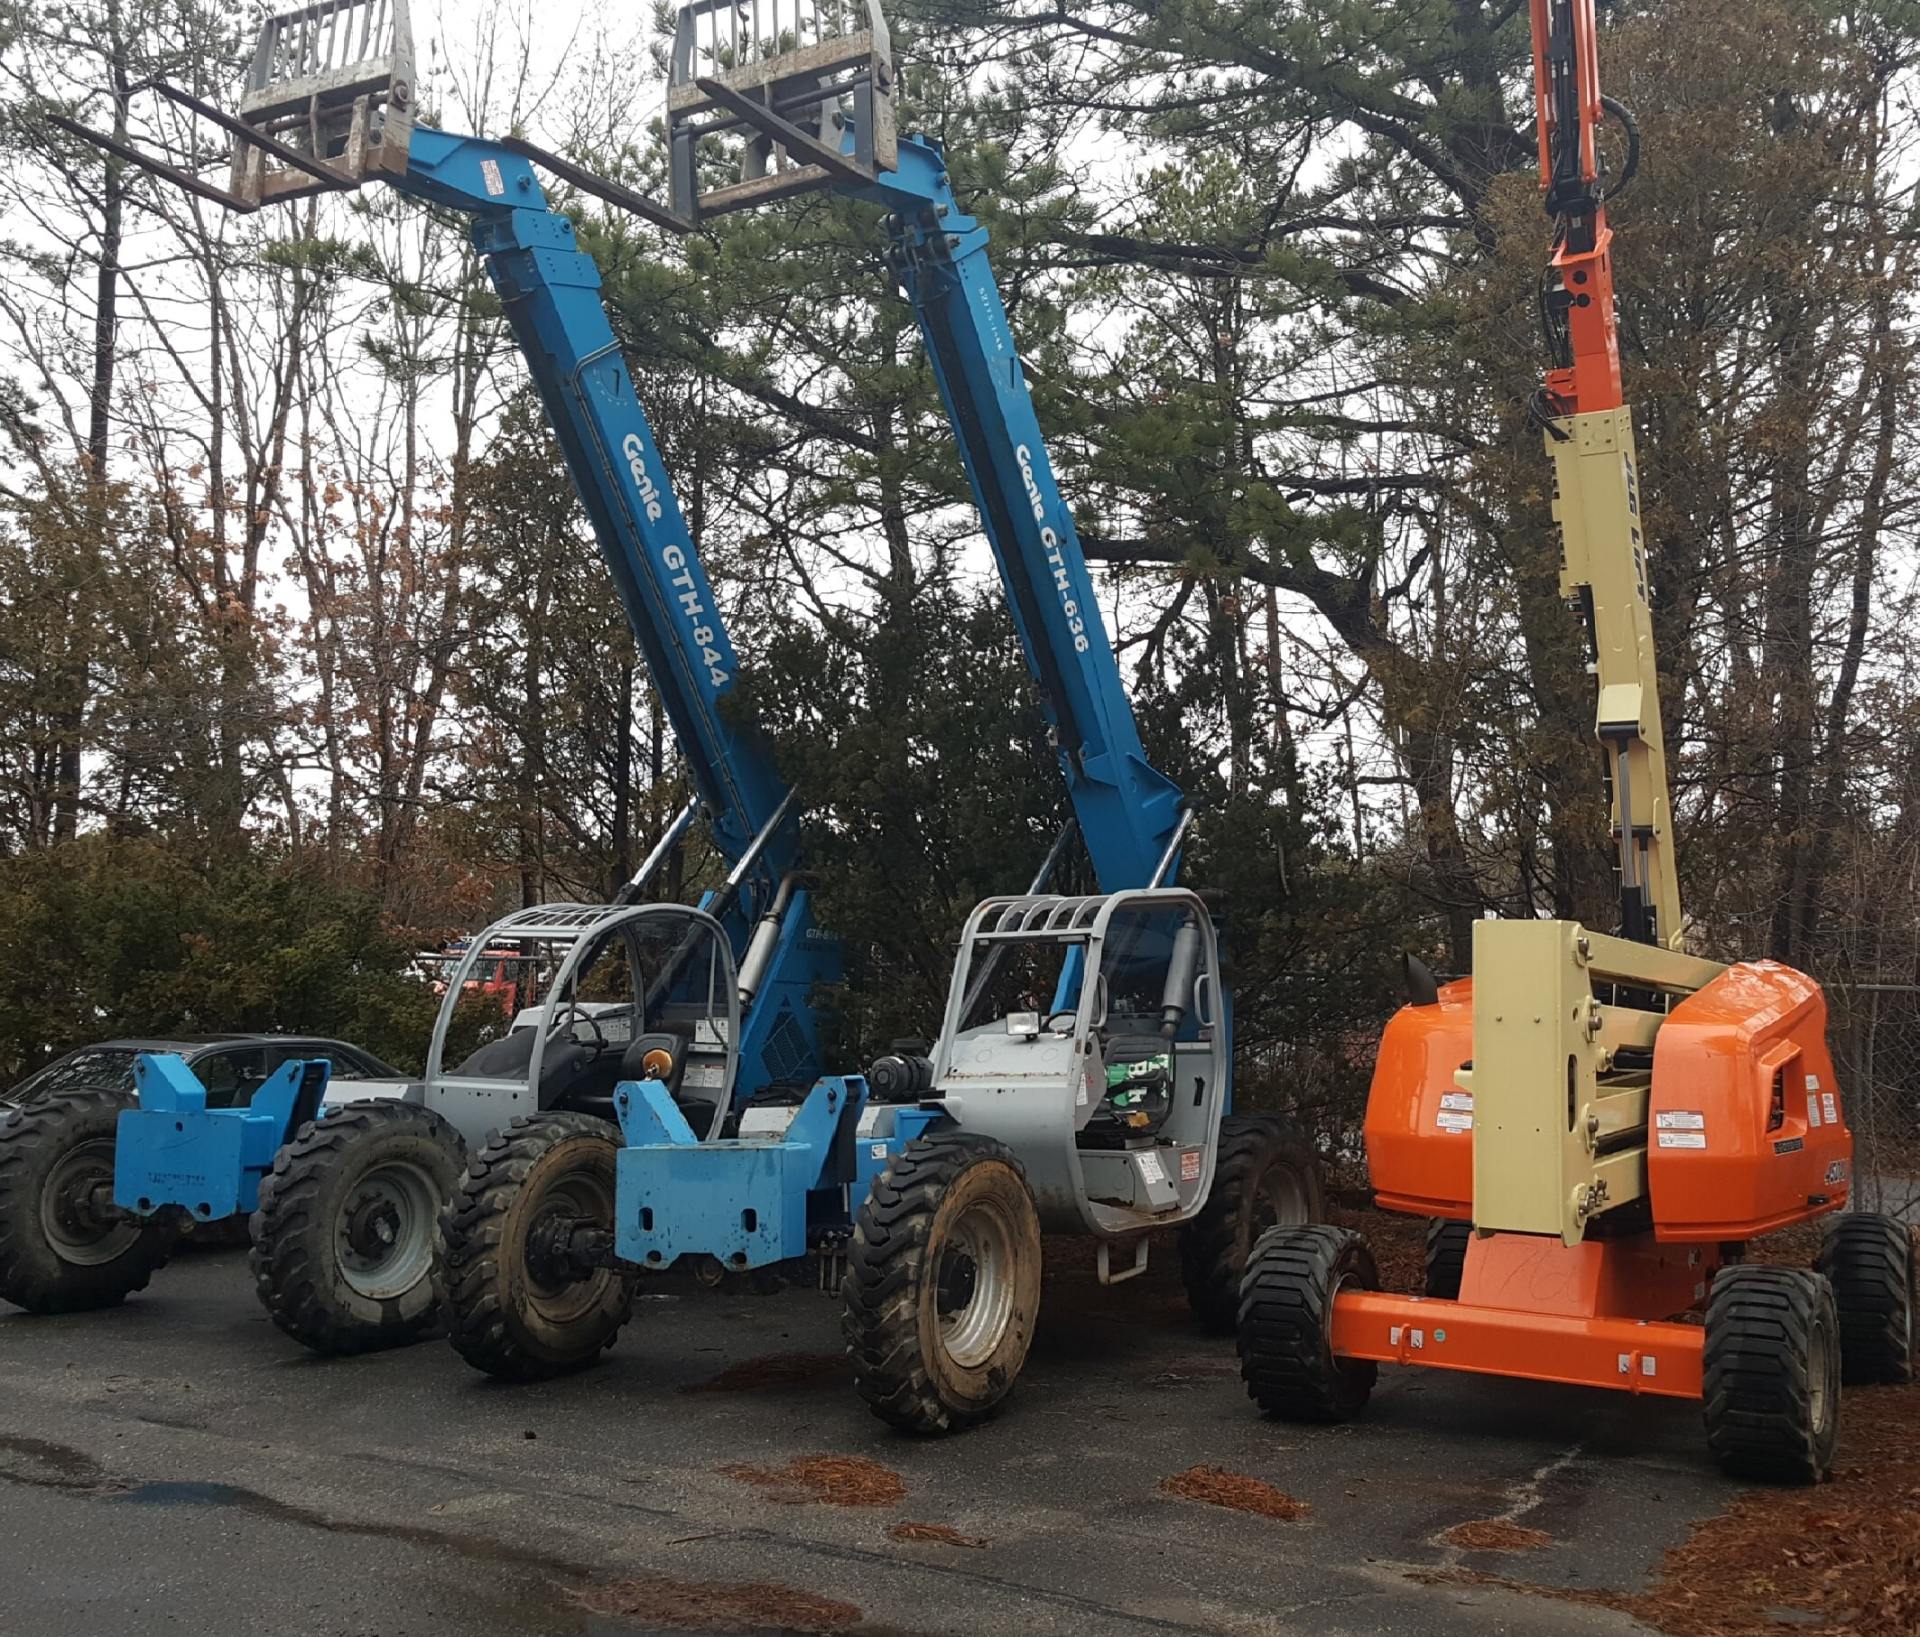 Forklifts — TTelehandlers And Jlg Rough Terrain 450 AJ Articulated In Manorville, NY